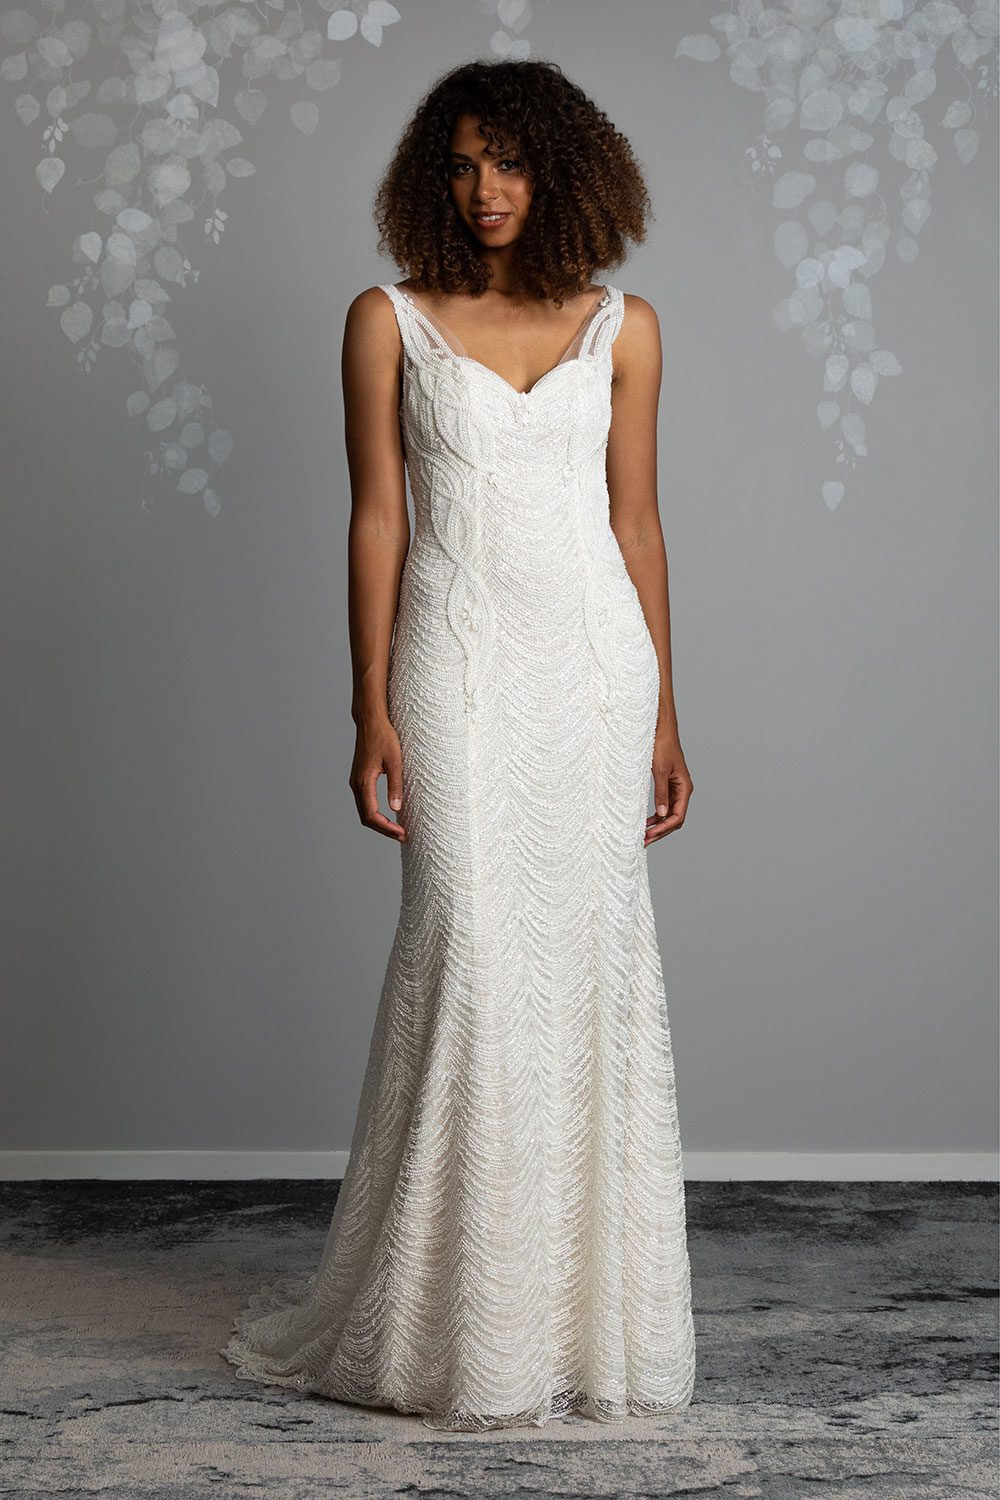 Juliette Wedding Dress from Vinka Design. Flattering stretch fitted lace wedding dress with beautiful ivory rich beading. Structured bodice provides support while remaining effortless to wear. Full length view of dress with structured bodice of ivory beaded lace over a champagne base